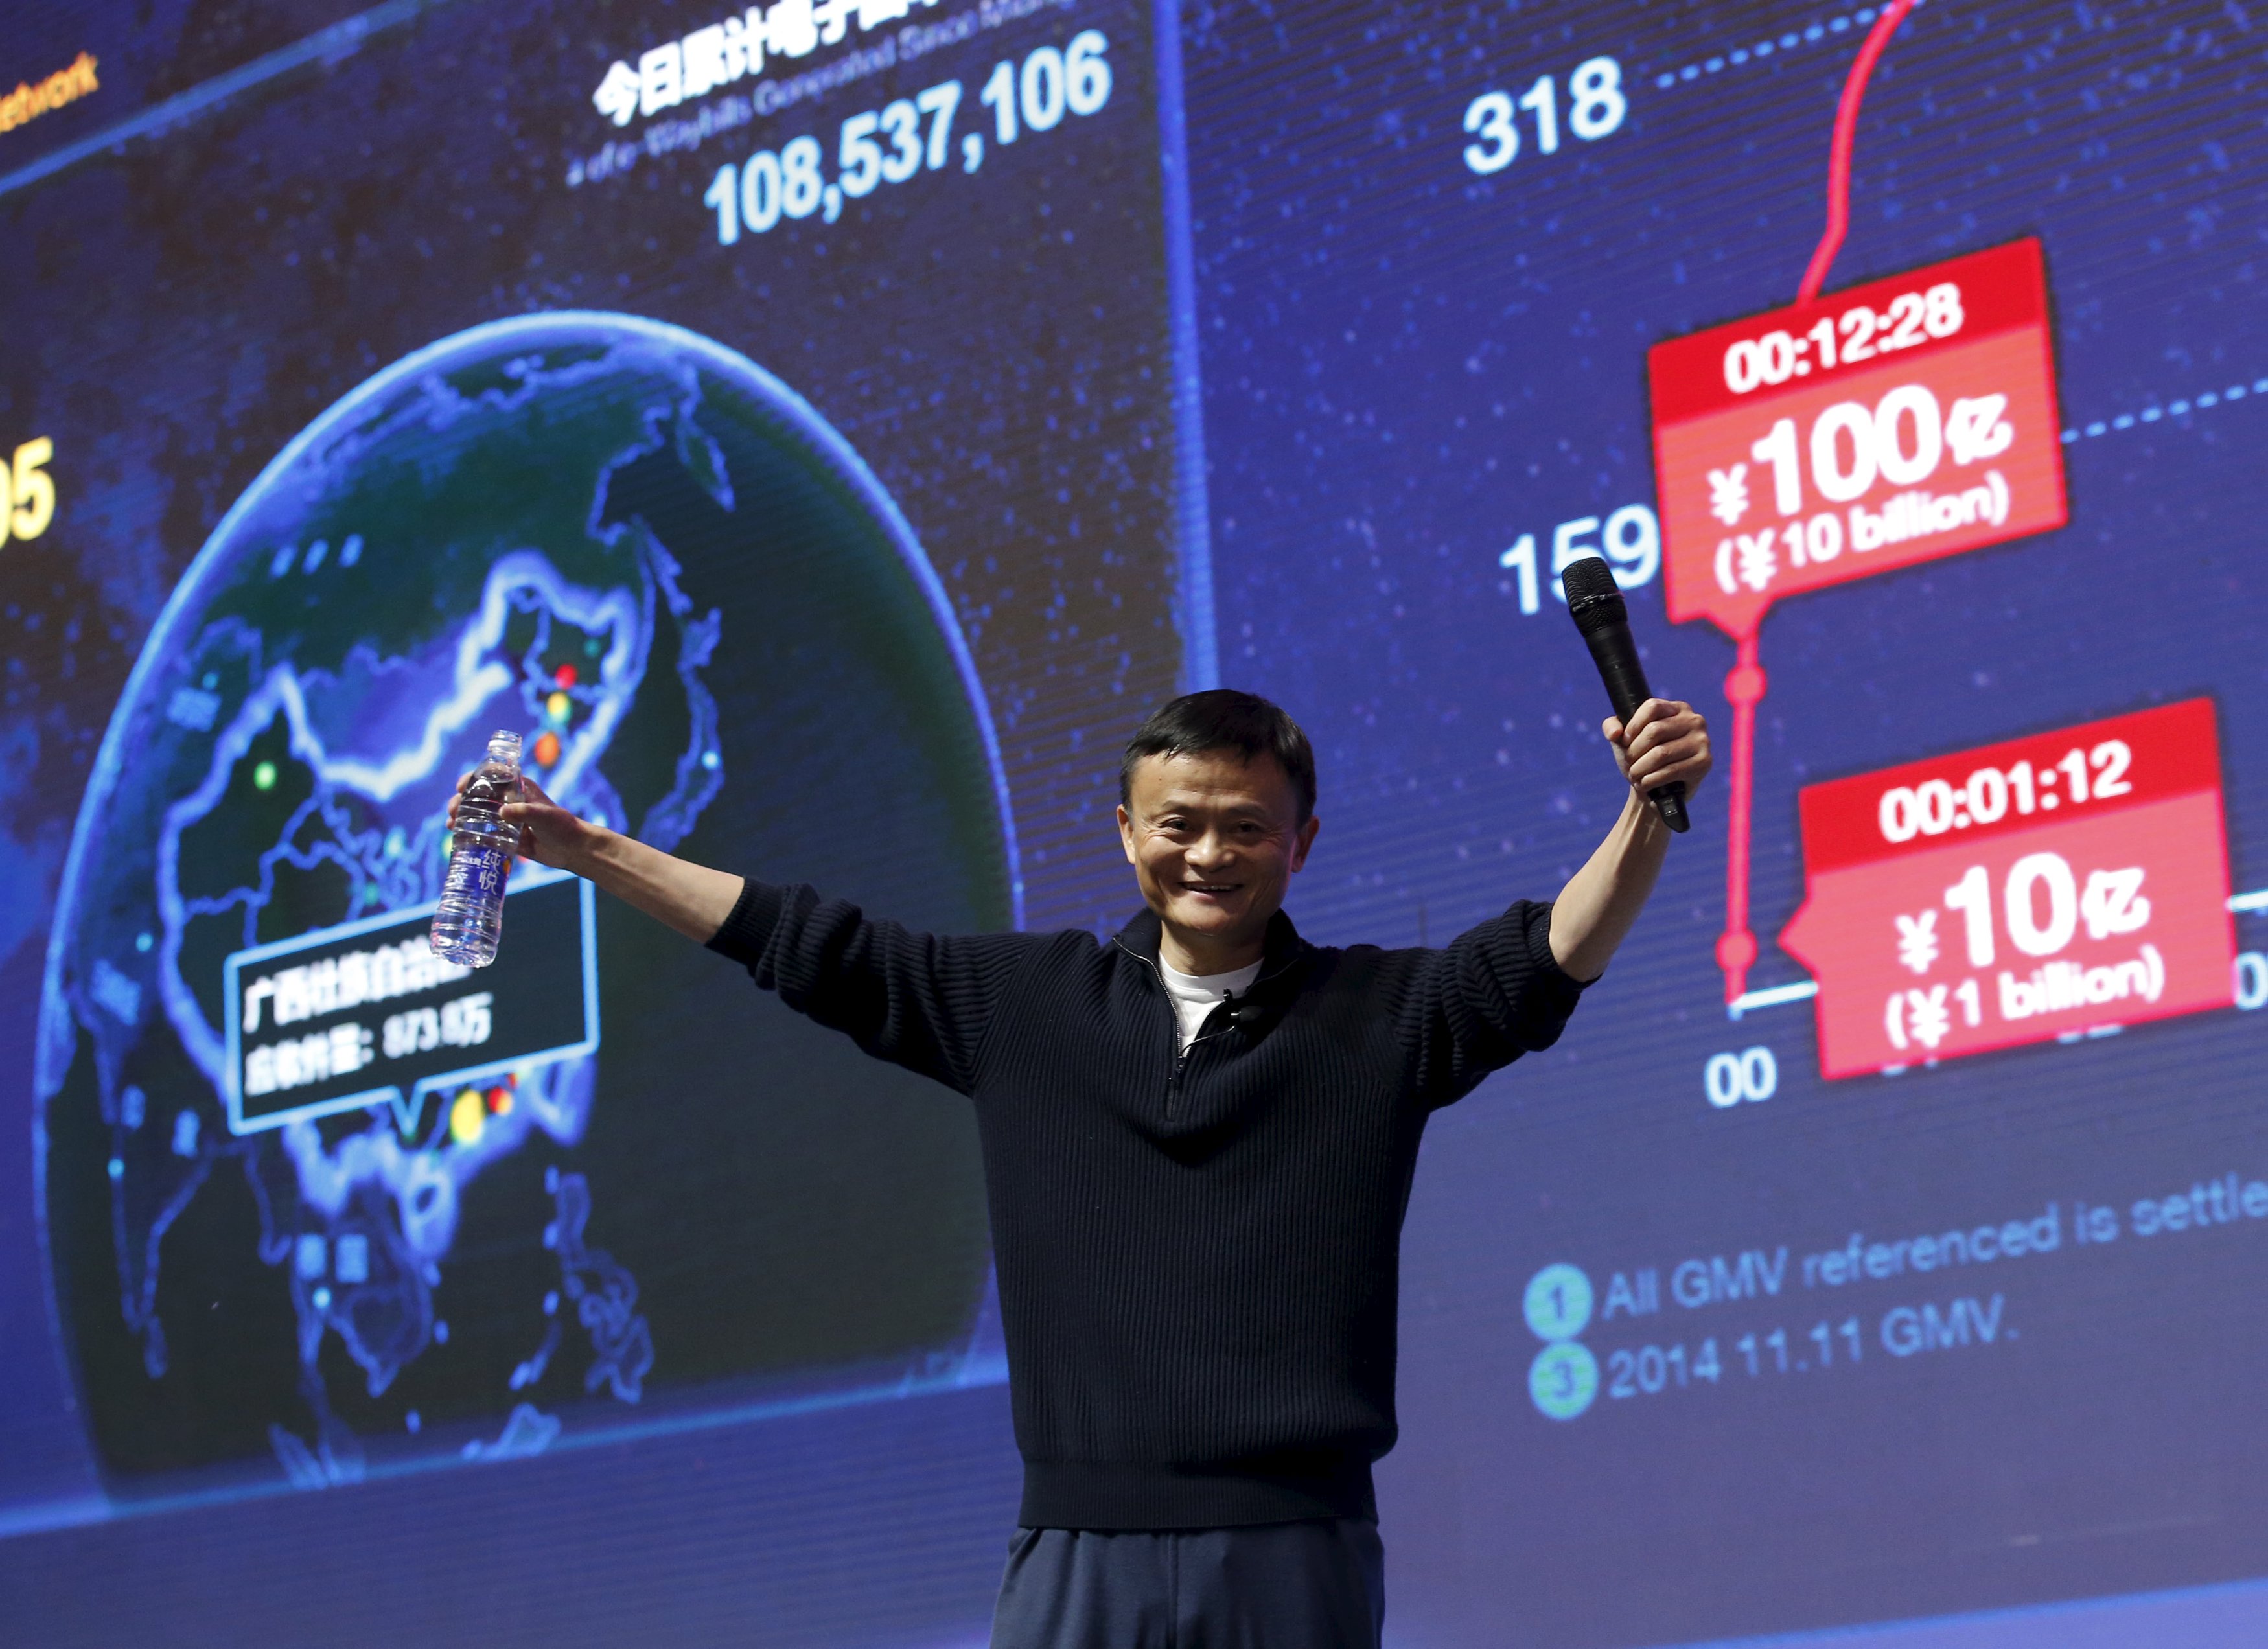 Alibaba founder and chairman Jack Ma gestures in front of a screen showing real-time data of transactions at Alibaba Group's 11.11 Global shopping festival in Beijing, China, November 11, 2015. Chinese e-commerce giant Alibaba Group Holdings Ltd said on Wednesday the value of merchandise it has sold so far during the Singles' Day online shopping extravaganza had surpassed last year's total of $9.3 billion. REUTERS/Kim Kyung-Hoon